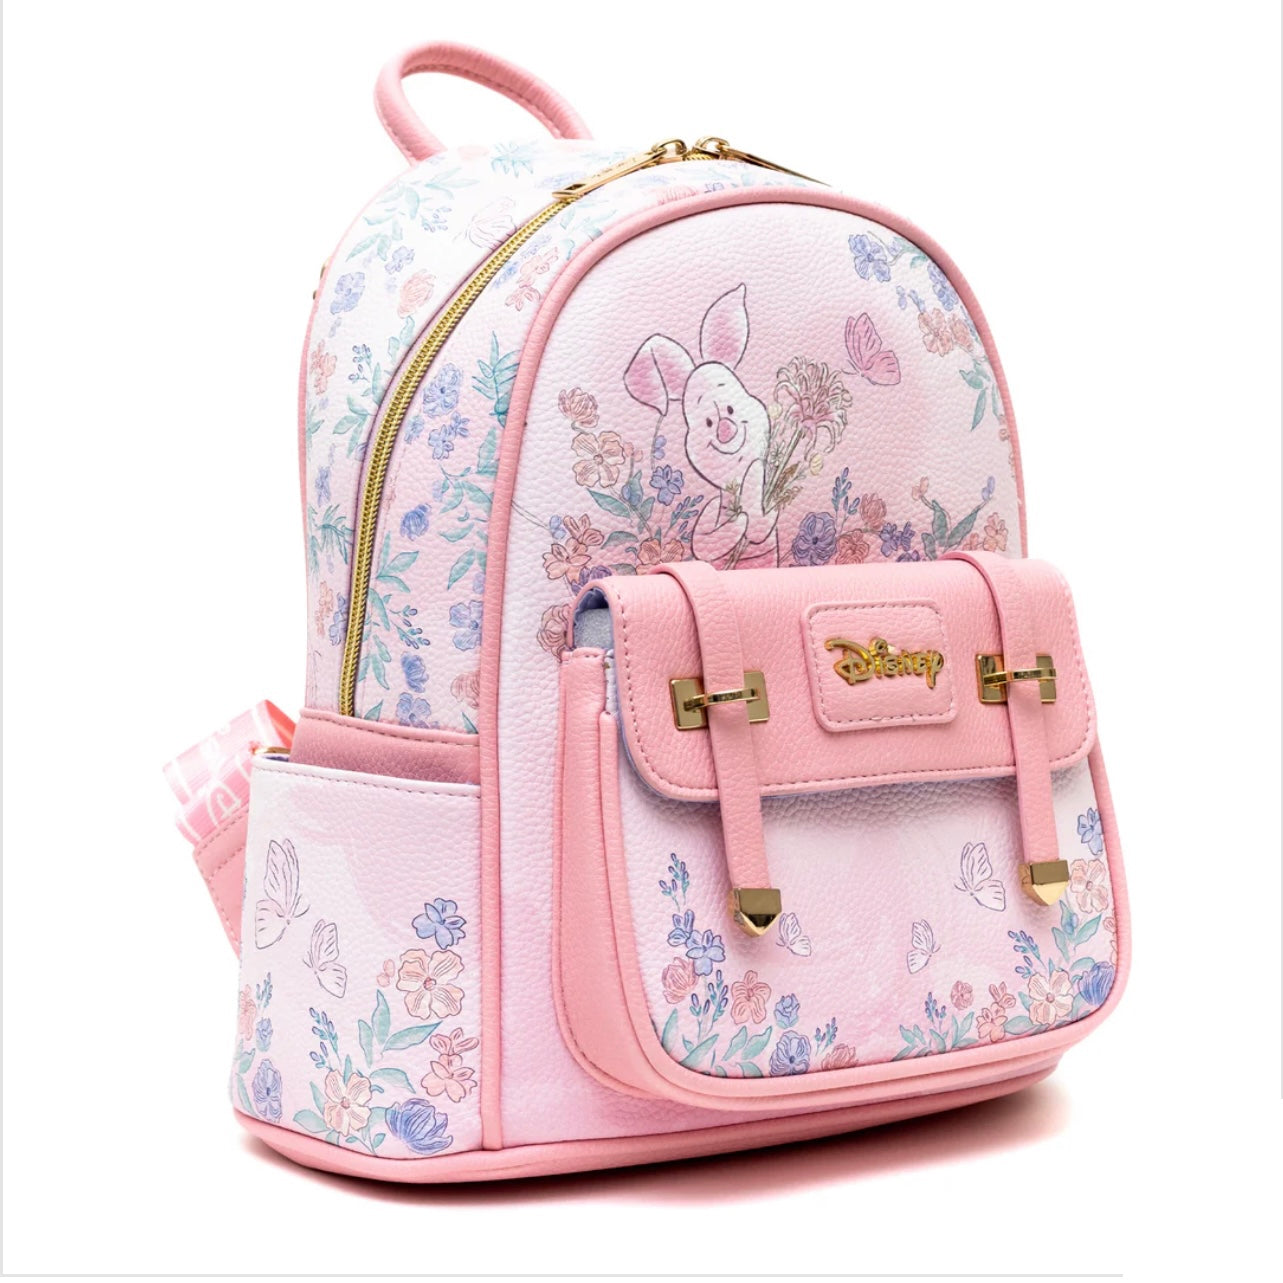 Exclusive Limited Edition Winnie the Pooh- Piglet Vegan Leather Backpack